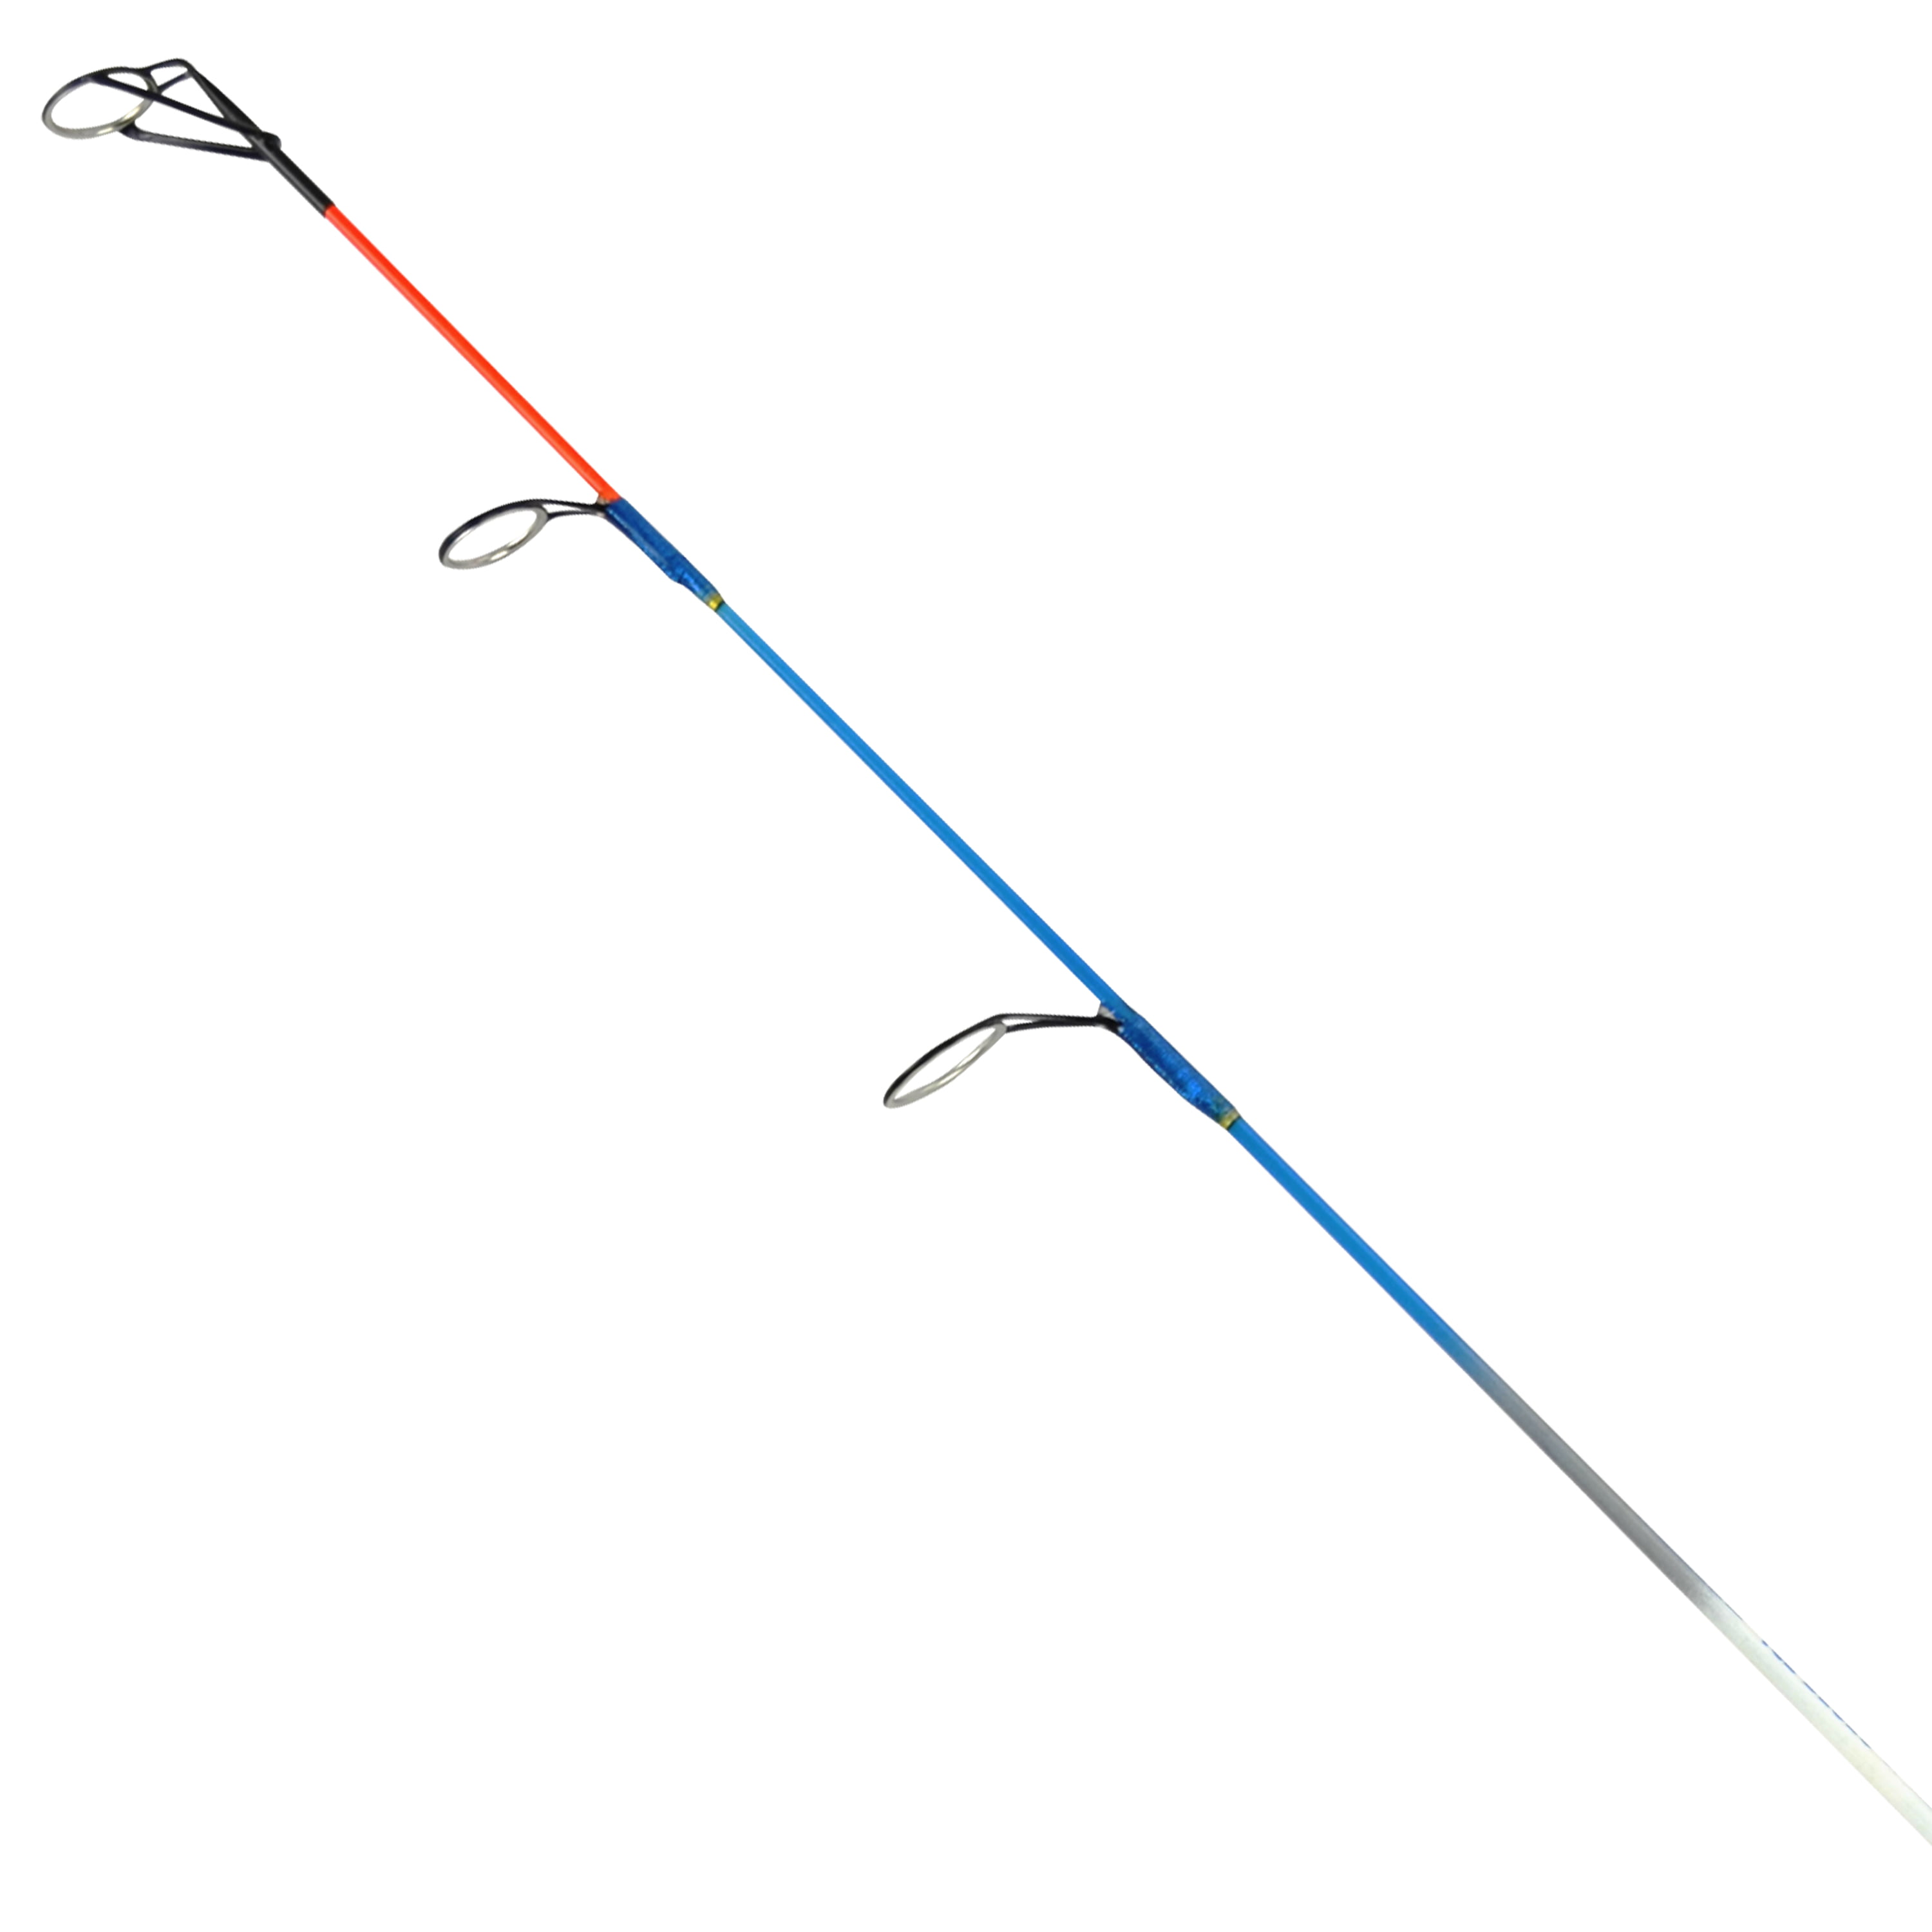 HT Enterprises 24 ICE BLUE ROD COMBO, ULTRA LIGHT ACTION WITH IS-502S REEL,  2 BB With Infinite Anti Reverse 